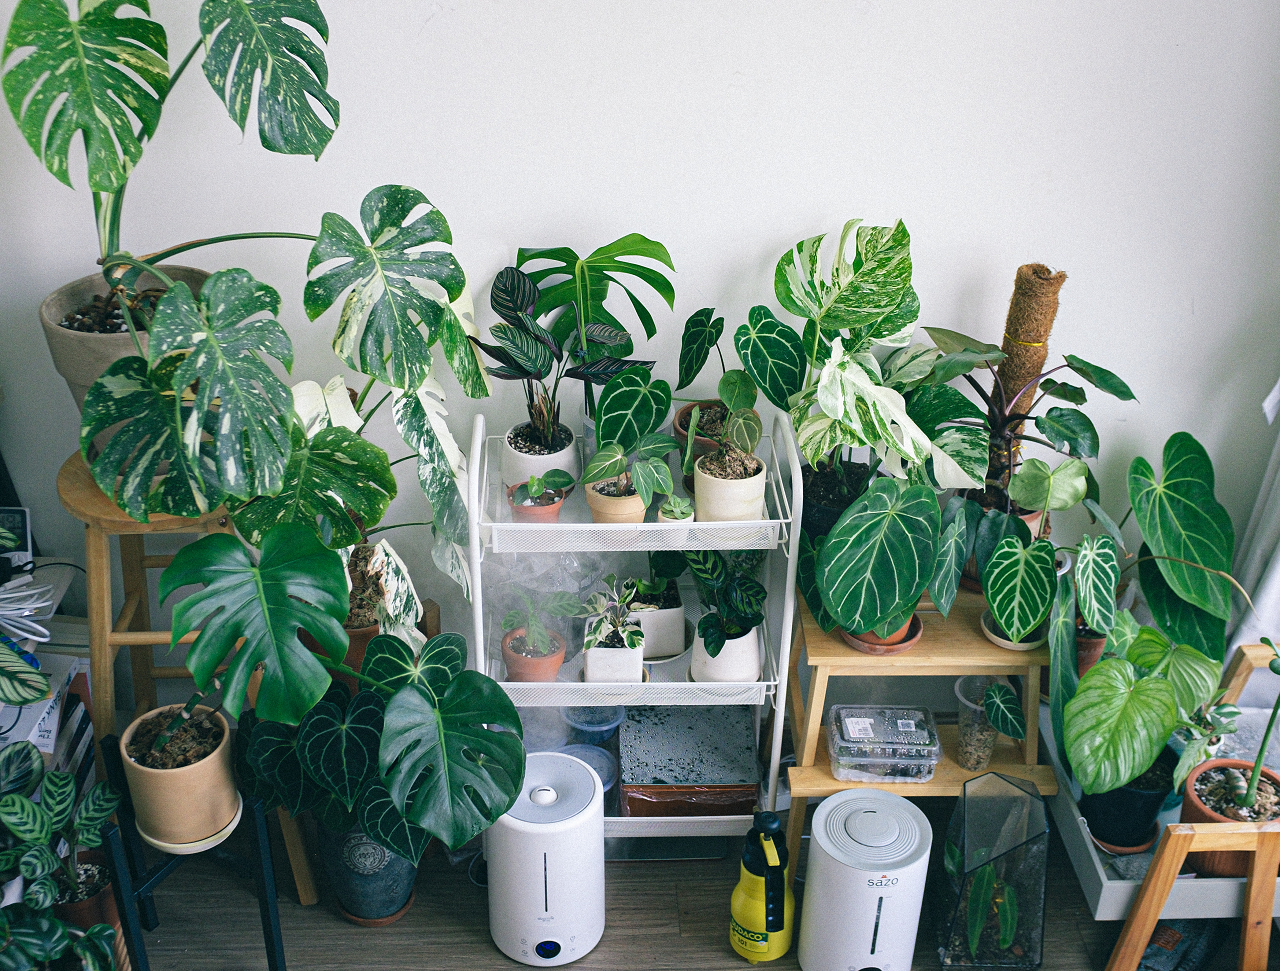 Image of a group of plants together with humidifiers going.